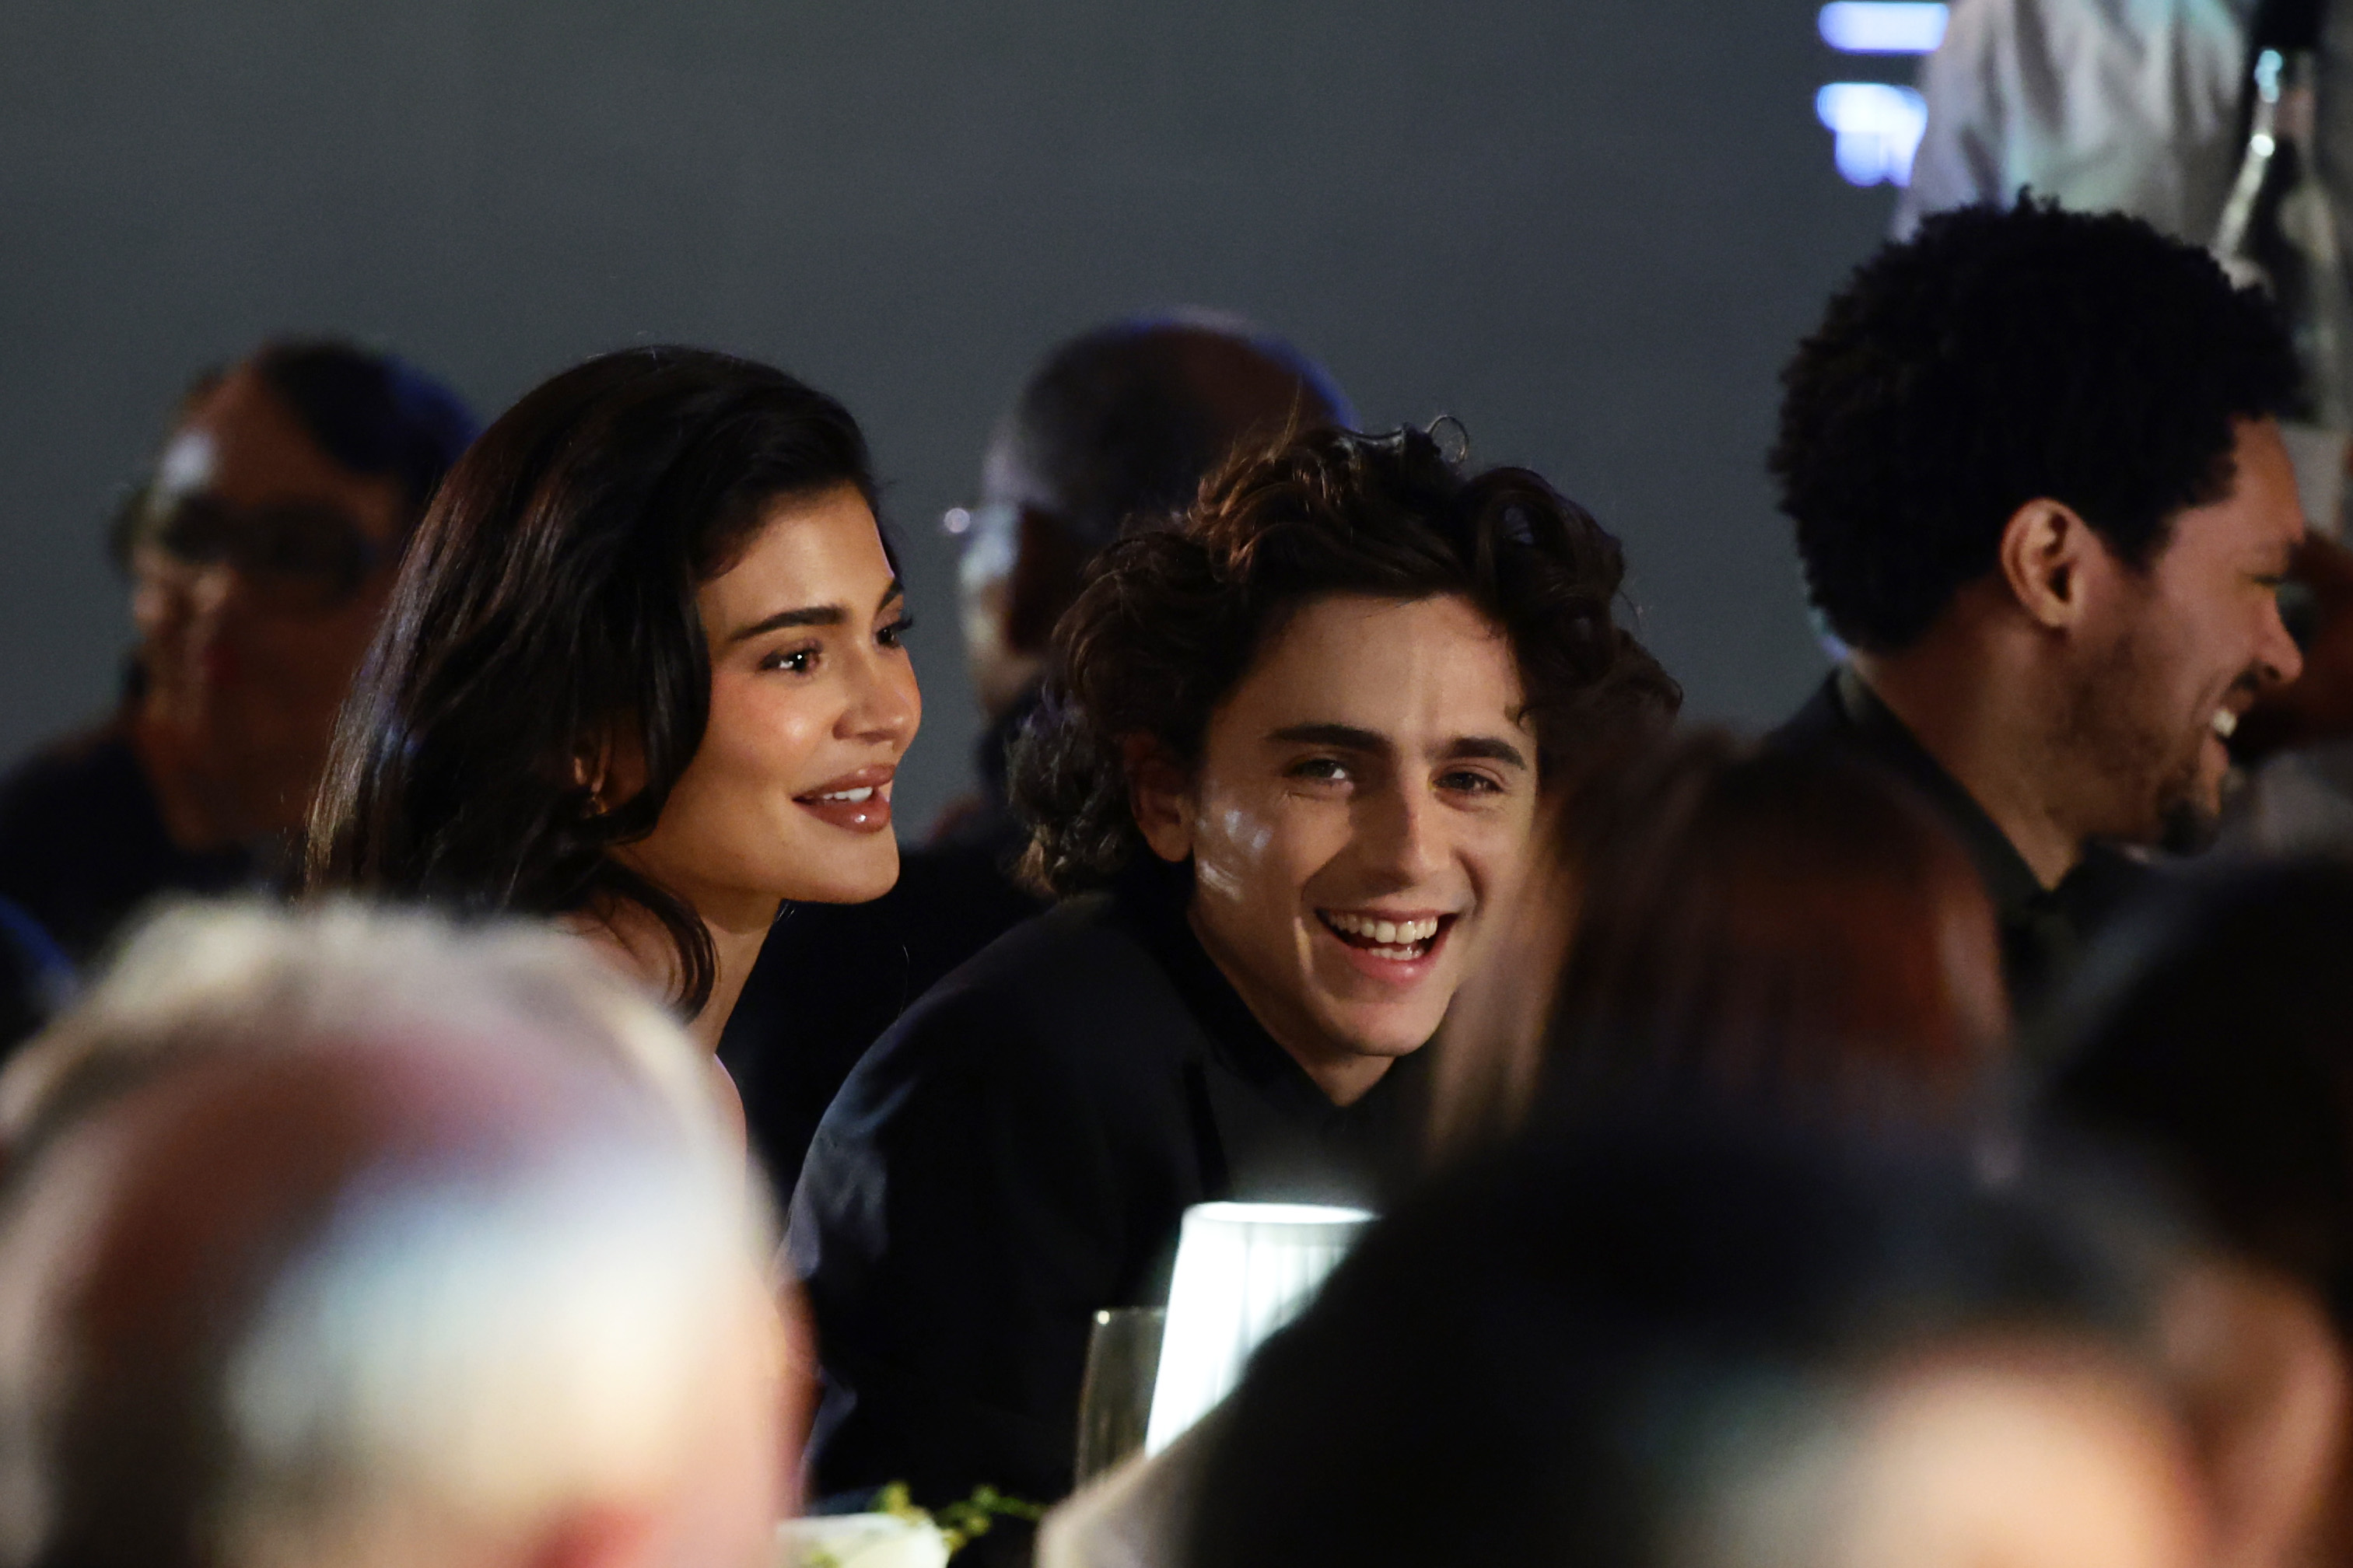 Kylie dodged questions about Timothée during a recent New York Times interview, leading many fans to believe they parted ways